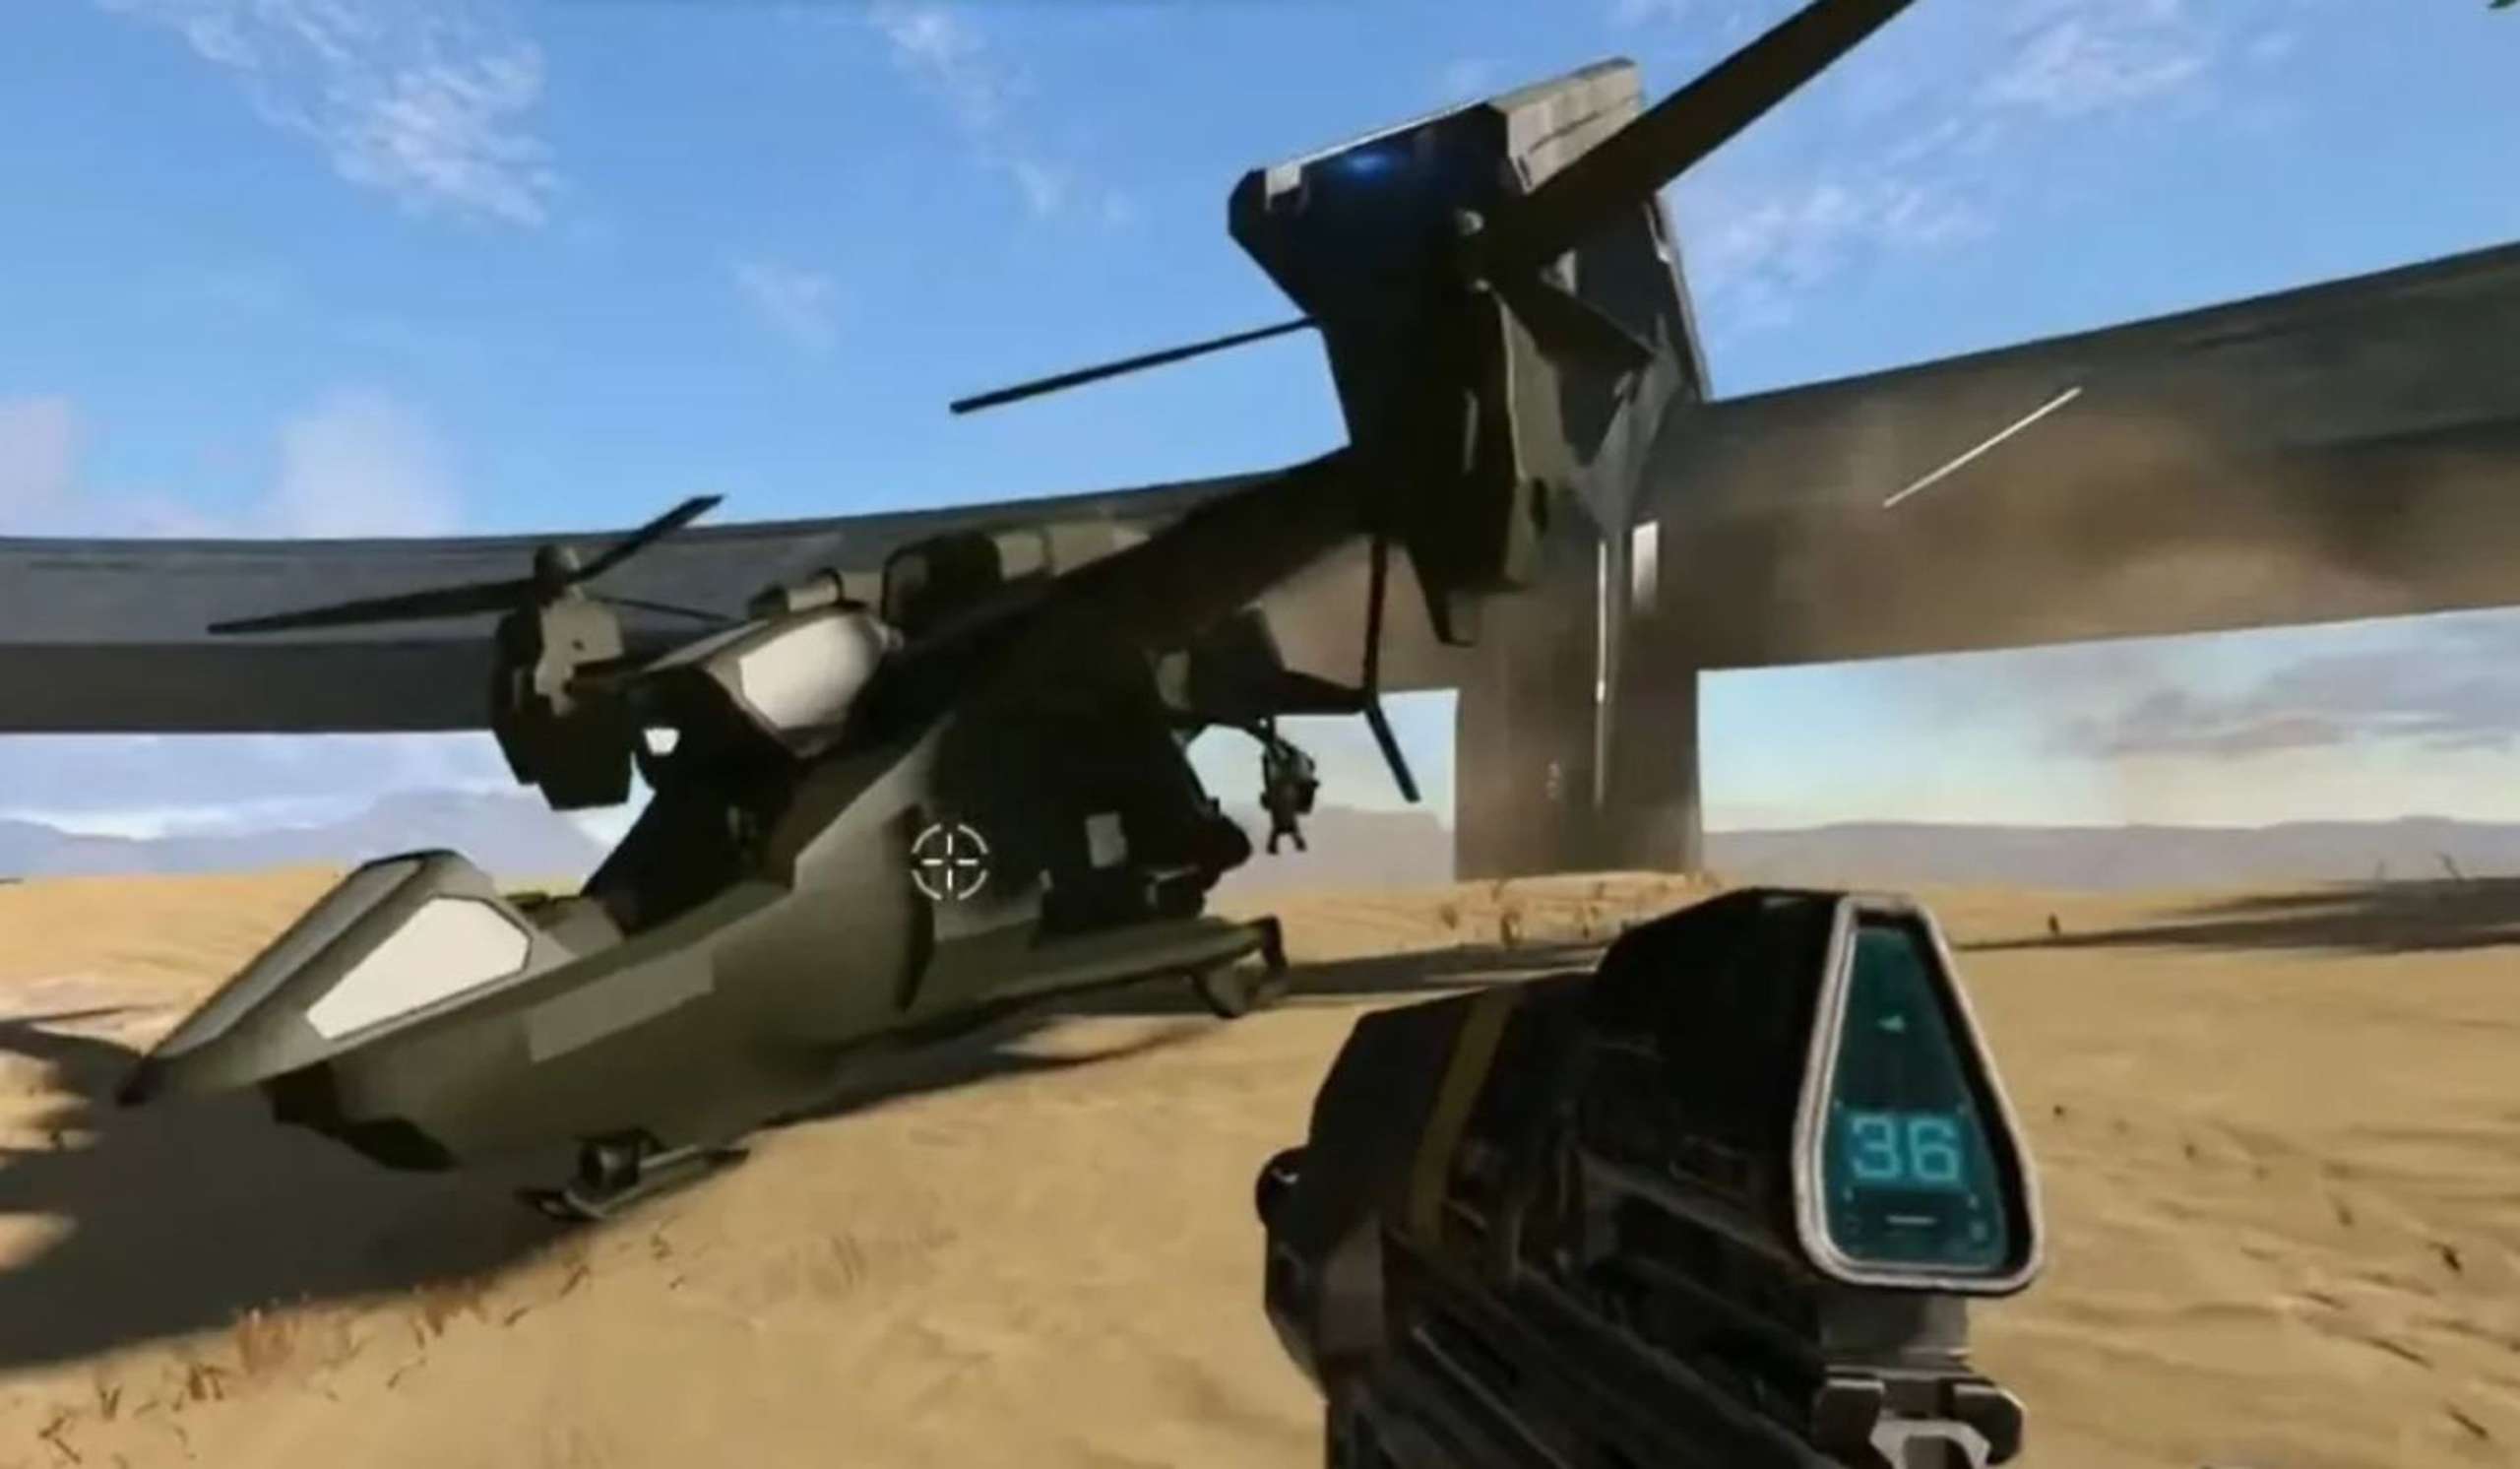 The UH-144 Falcon Rotor Copter That Might Be In Halo Infinite Is Depicted In The Most Recent Leak As An Unfinished Model